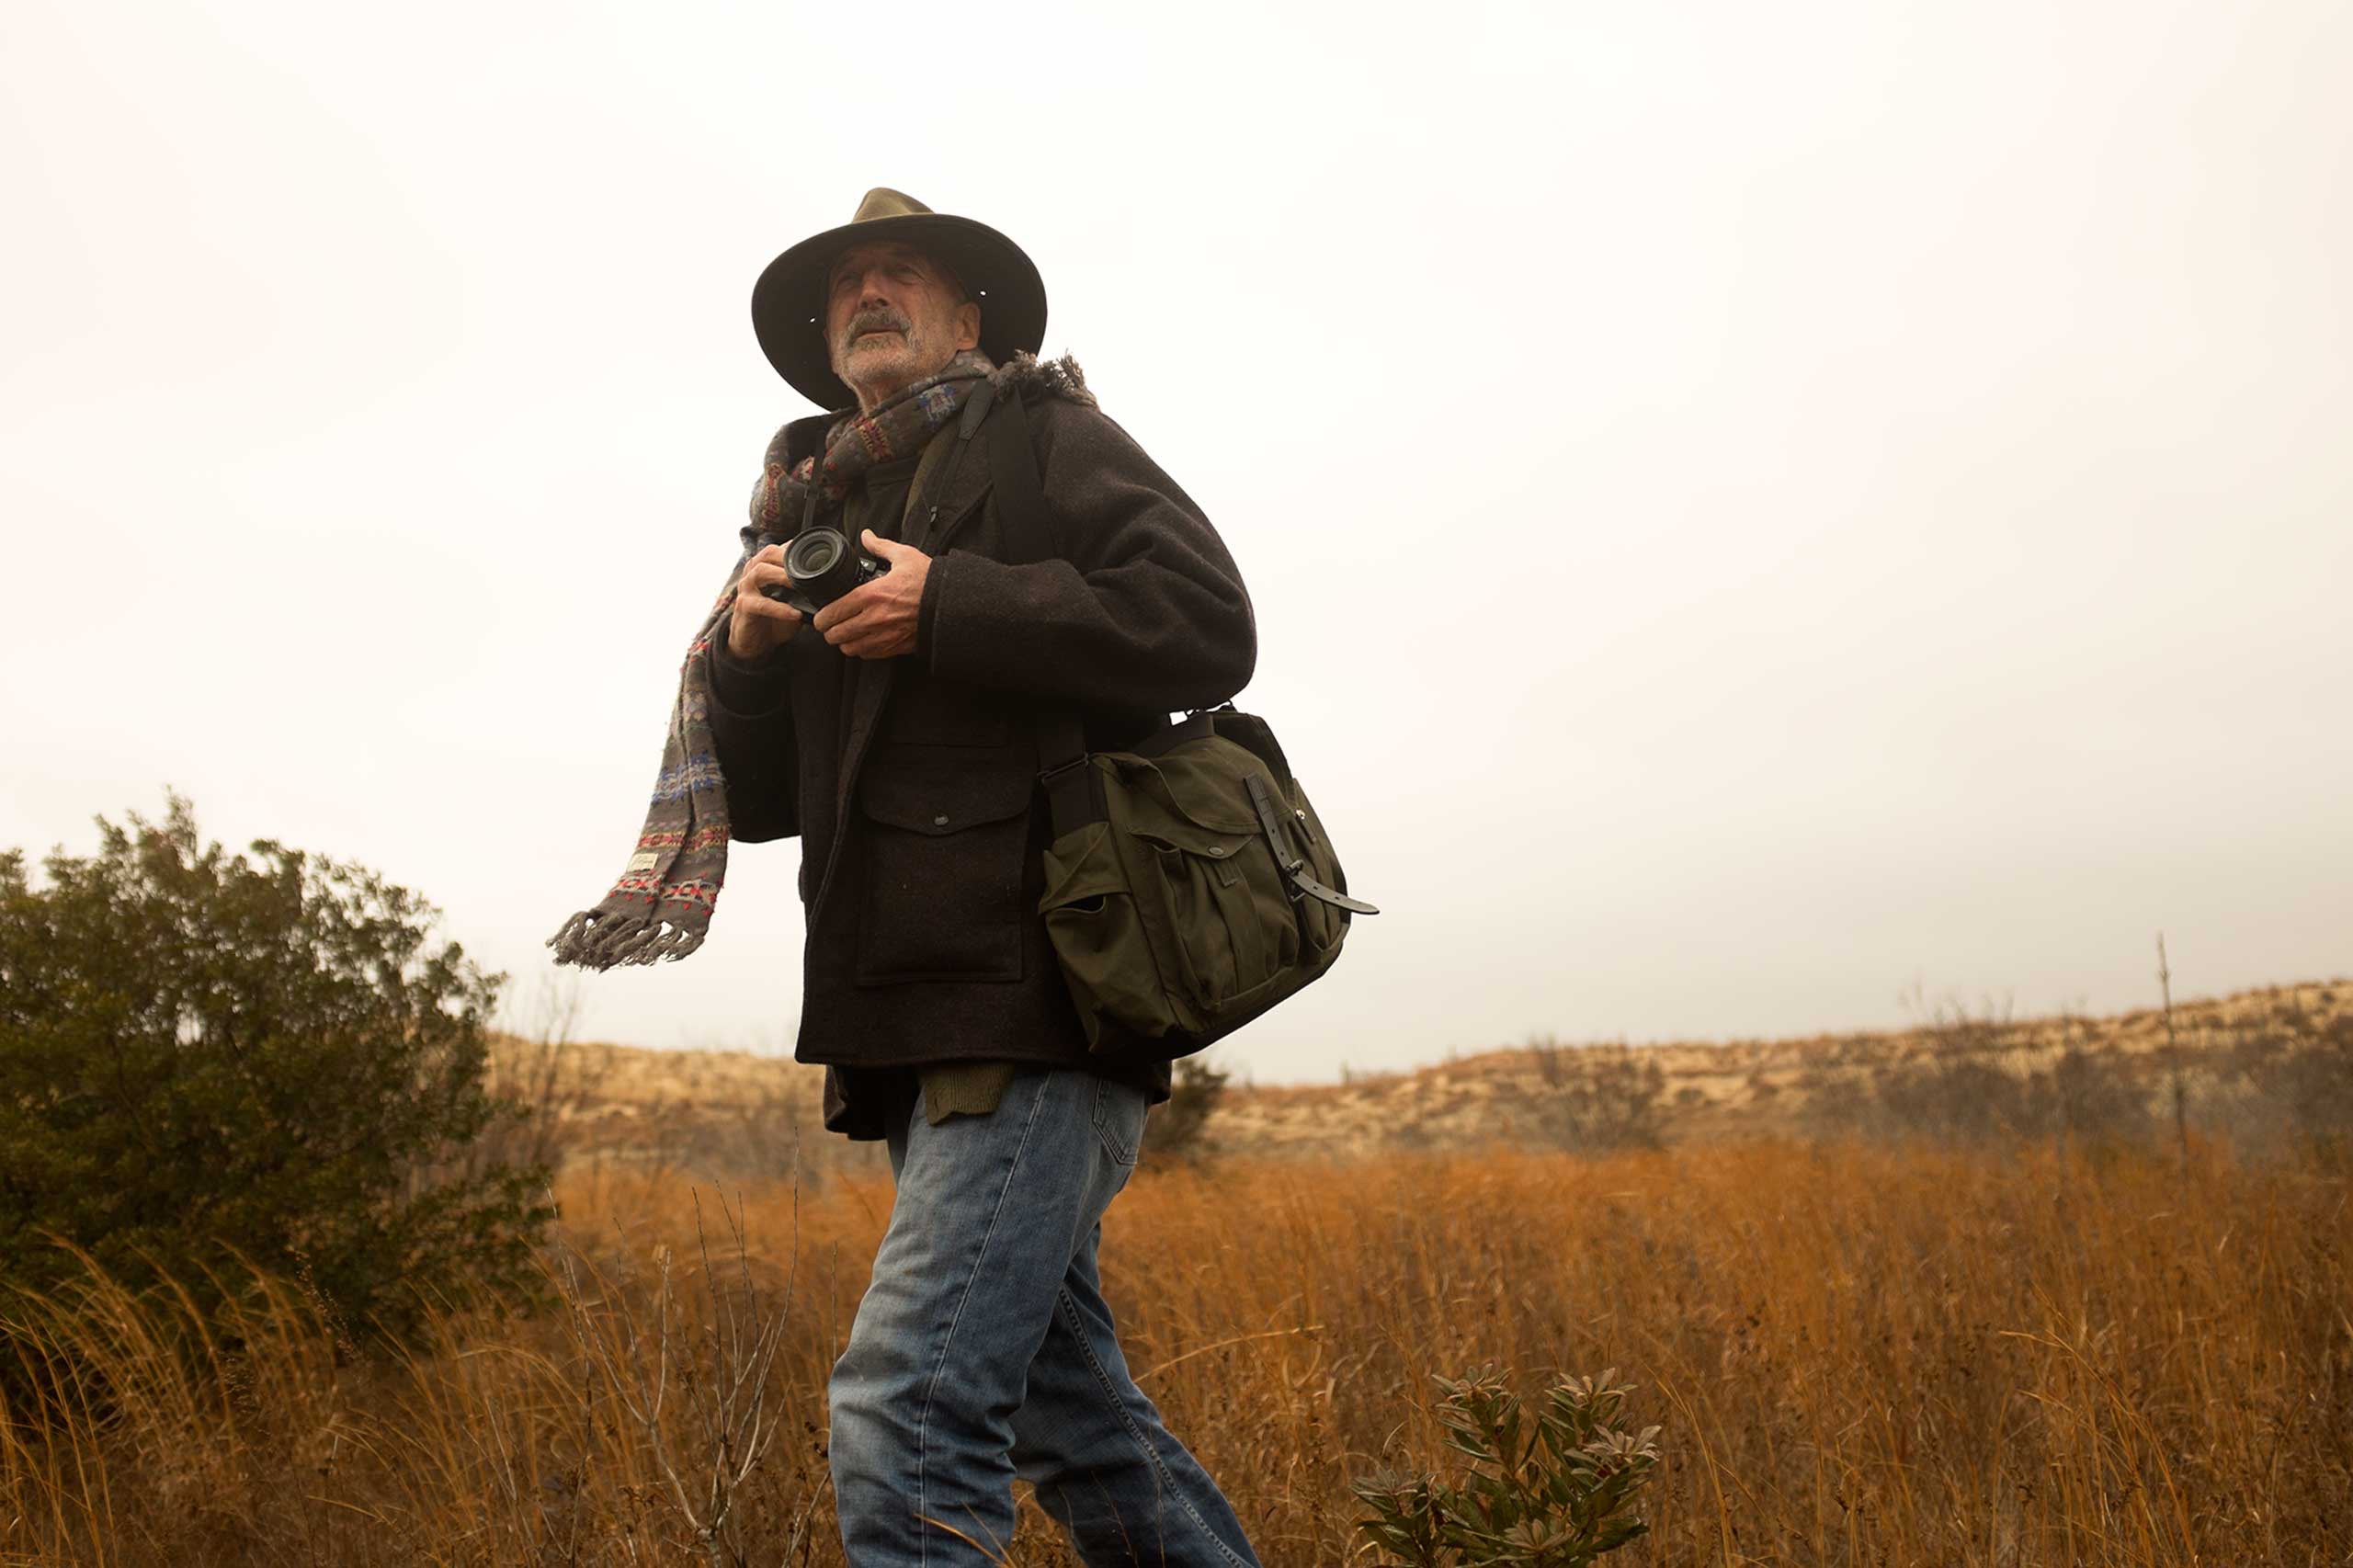 Harvey shooting on location with the bag he designed for Filson